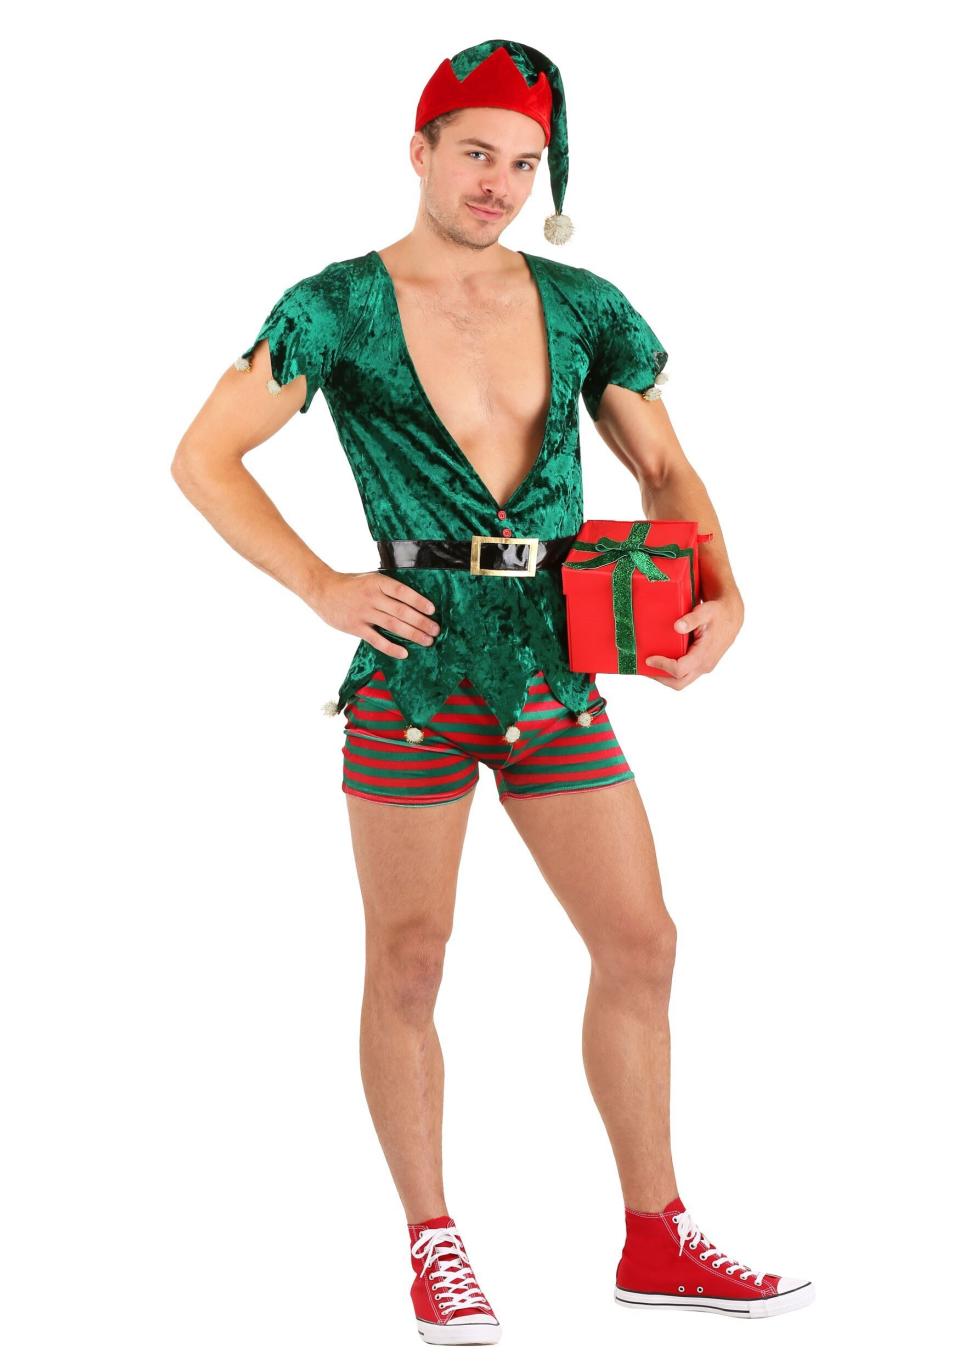 If you're one of those people who fantasize about the romantic goings-on in Santa's workshop, this <a href="https://www.halloweencostumes.com/mens-sexy-christmas-elf-costume.html" target="_blank" rel="noopener noreferrer">sexy elf costume</a> is perfect for role playing.